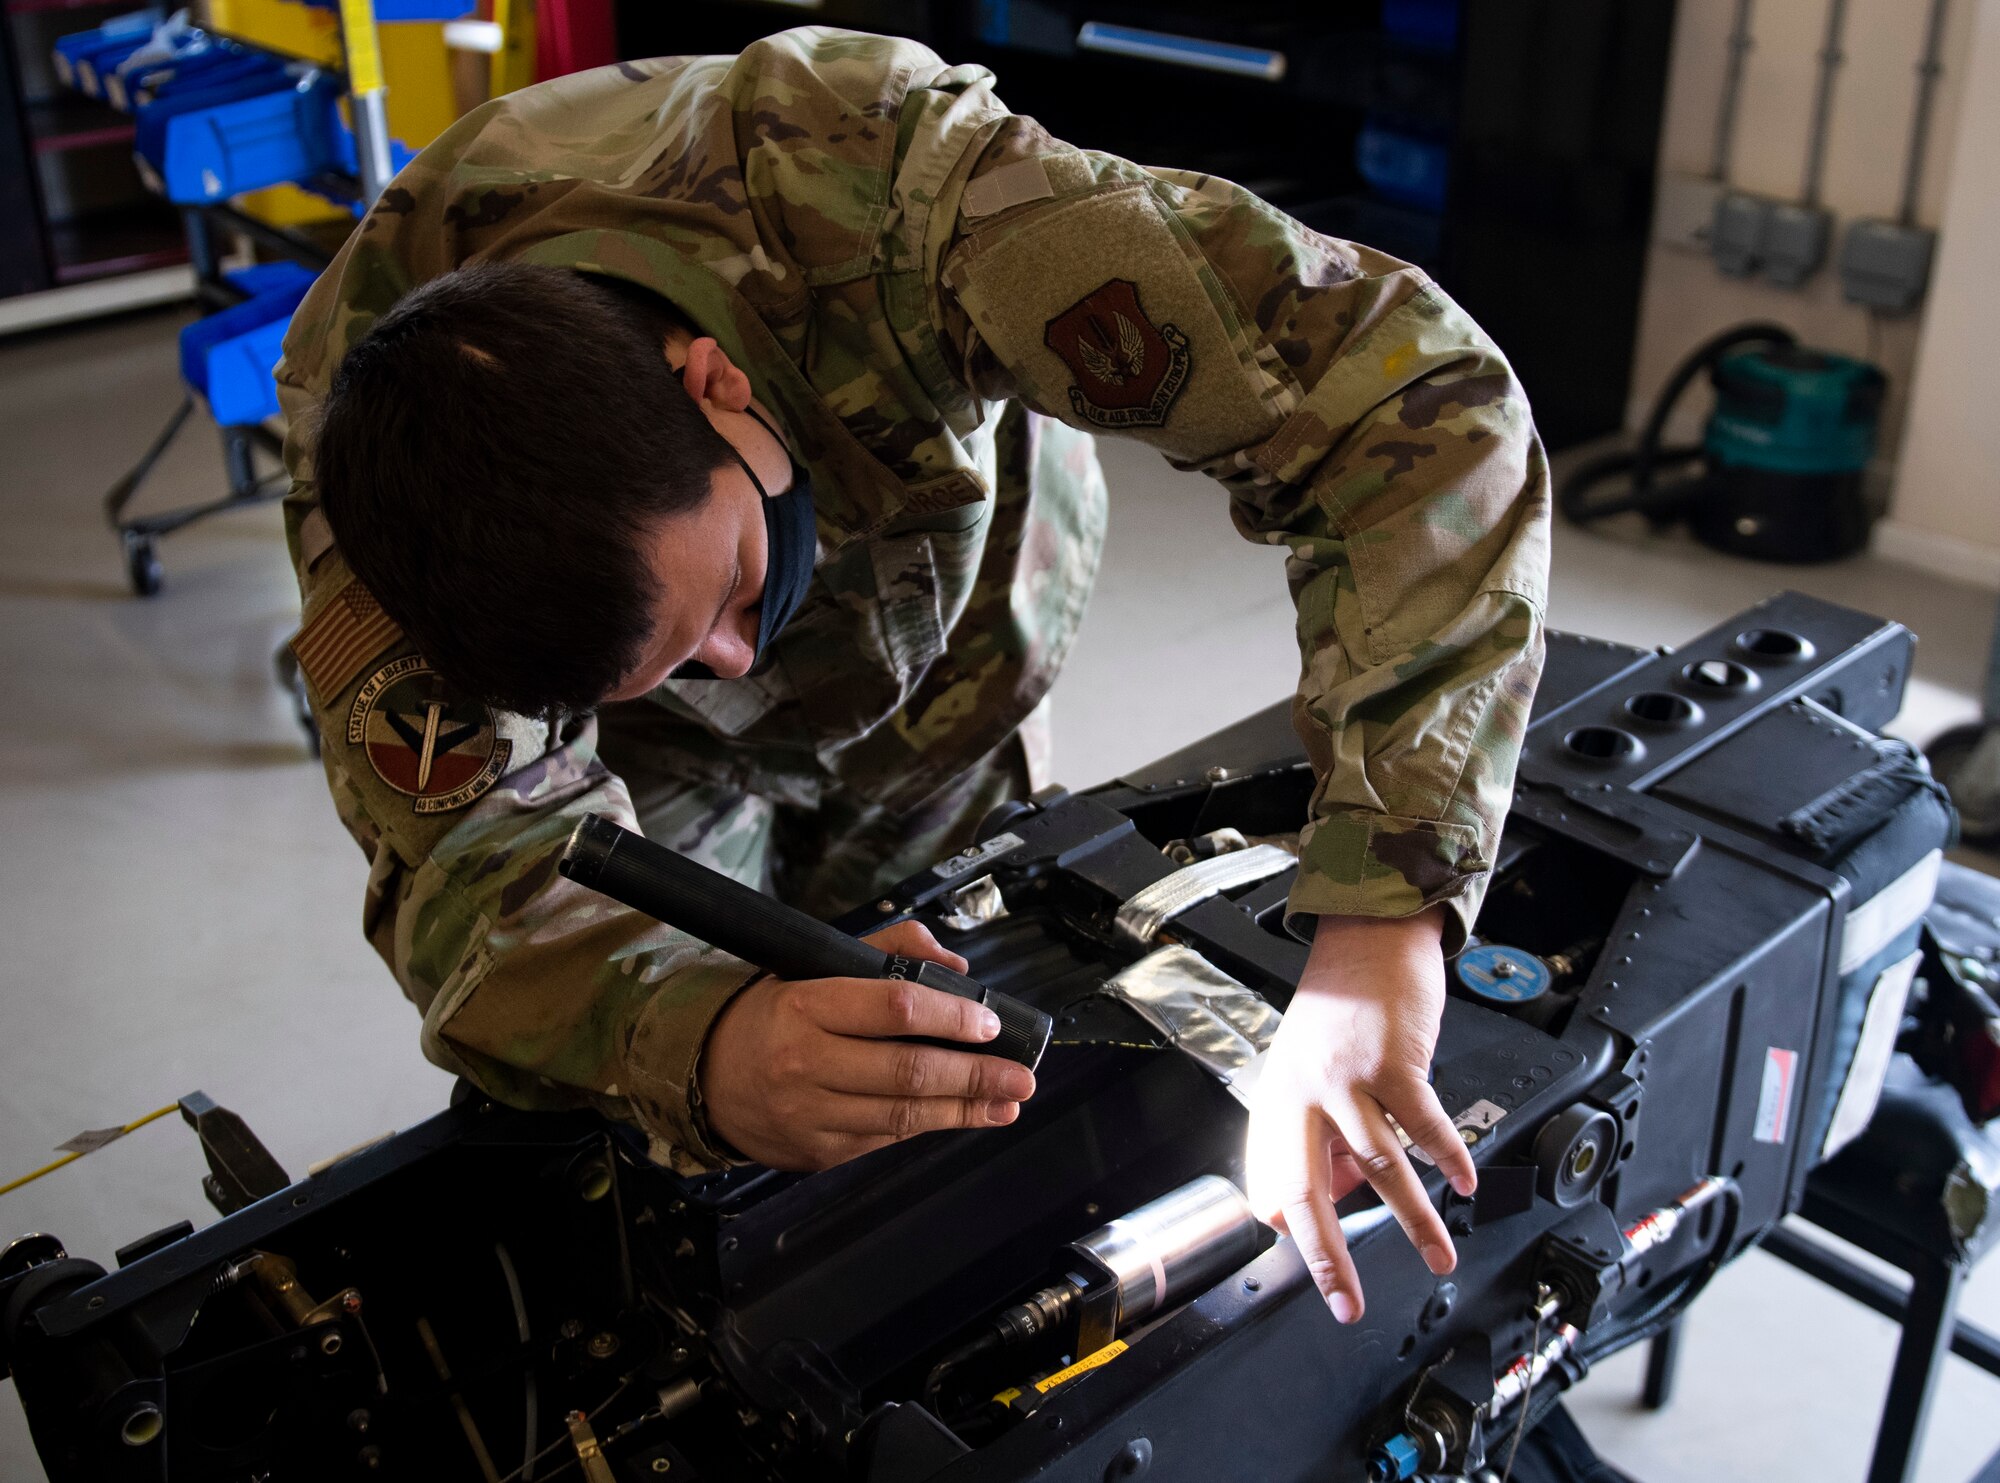 An accessories flight Airman assigned to the 48th Maintenance Group performs a maintenance check on a pilot seat at Royal Air Force Lakenheath, England, April 30, 2020. The egress shop helped the 48th MXG earn the 2019 USAFE-AFAFRICA Clements McMullen Memorial Daedalian Weapon System Maintenance Trophy. (U.S. Air Force photo by Airman 1st Class Madeline Herzog)